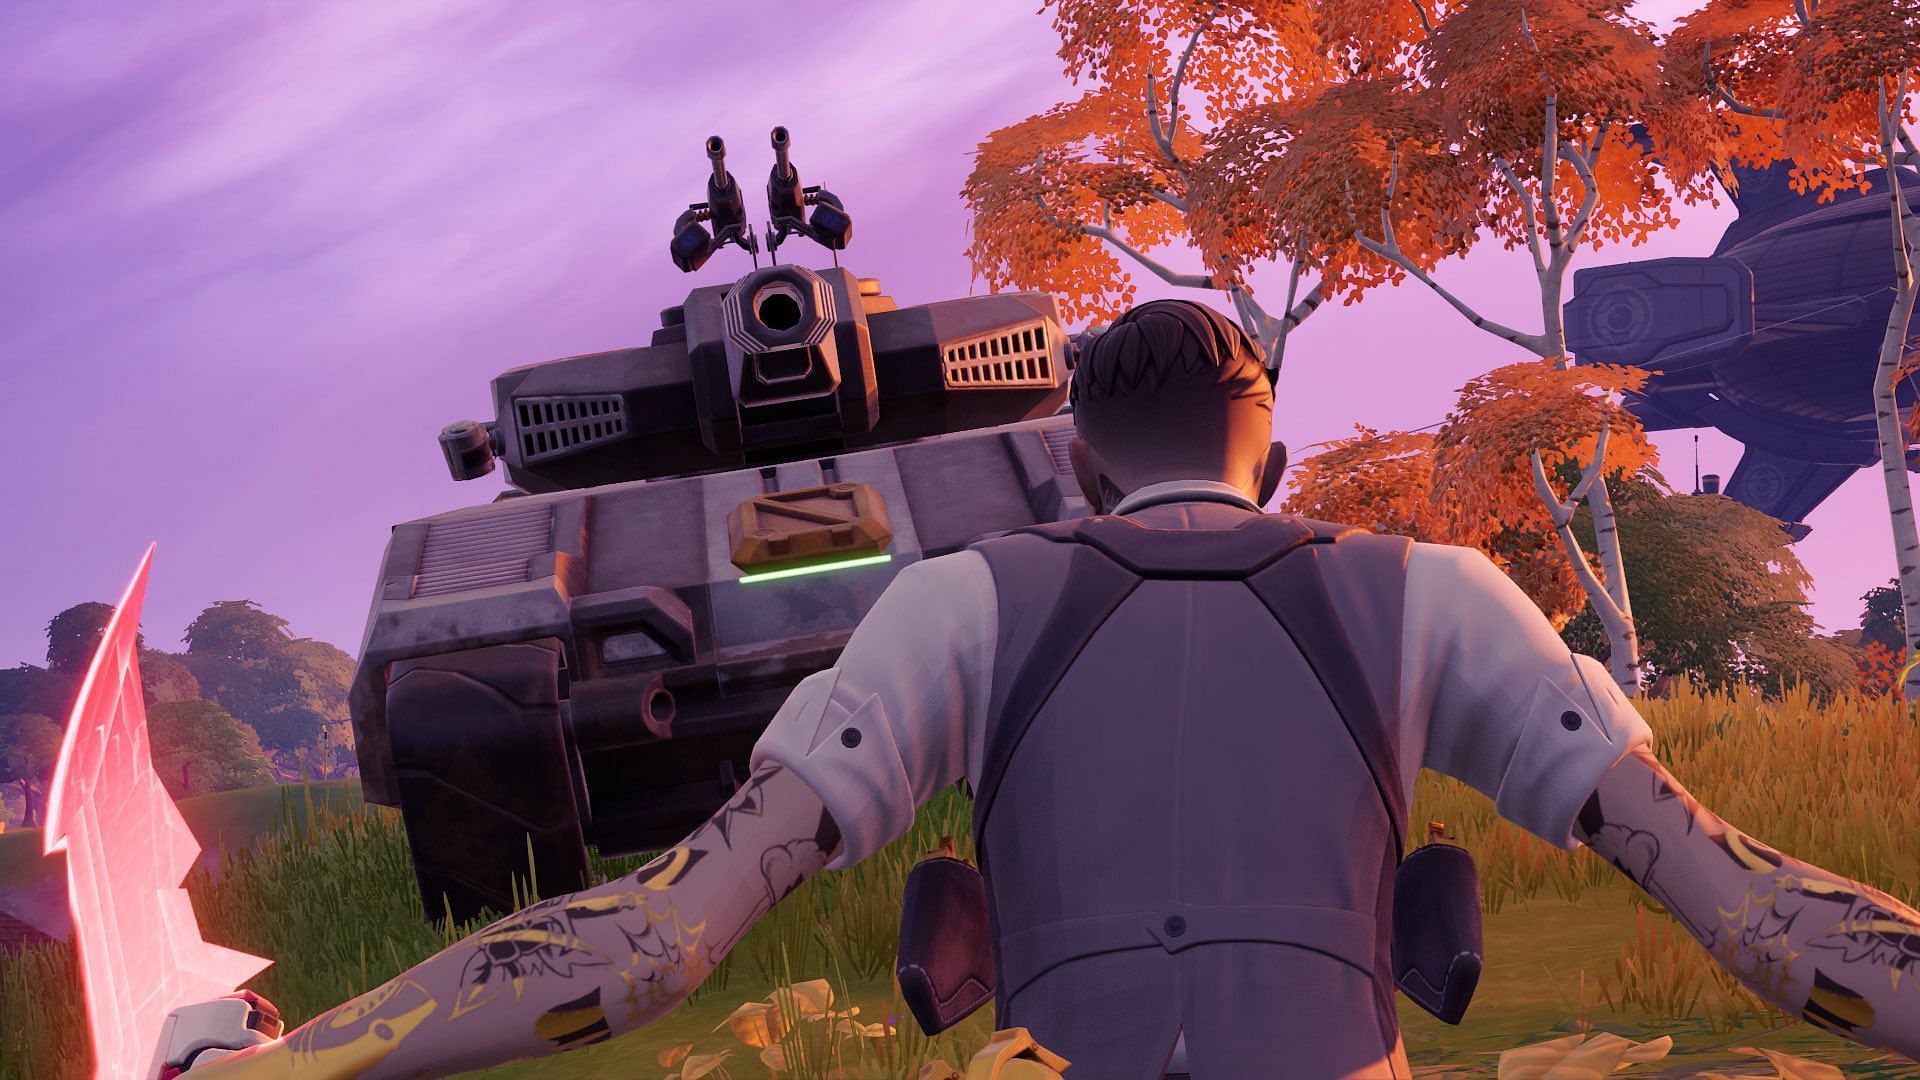 Titan Tanks in Fortnite are no longer invincible once their engines are disabled (Image via Twitter/PetrvsMaximvs)